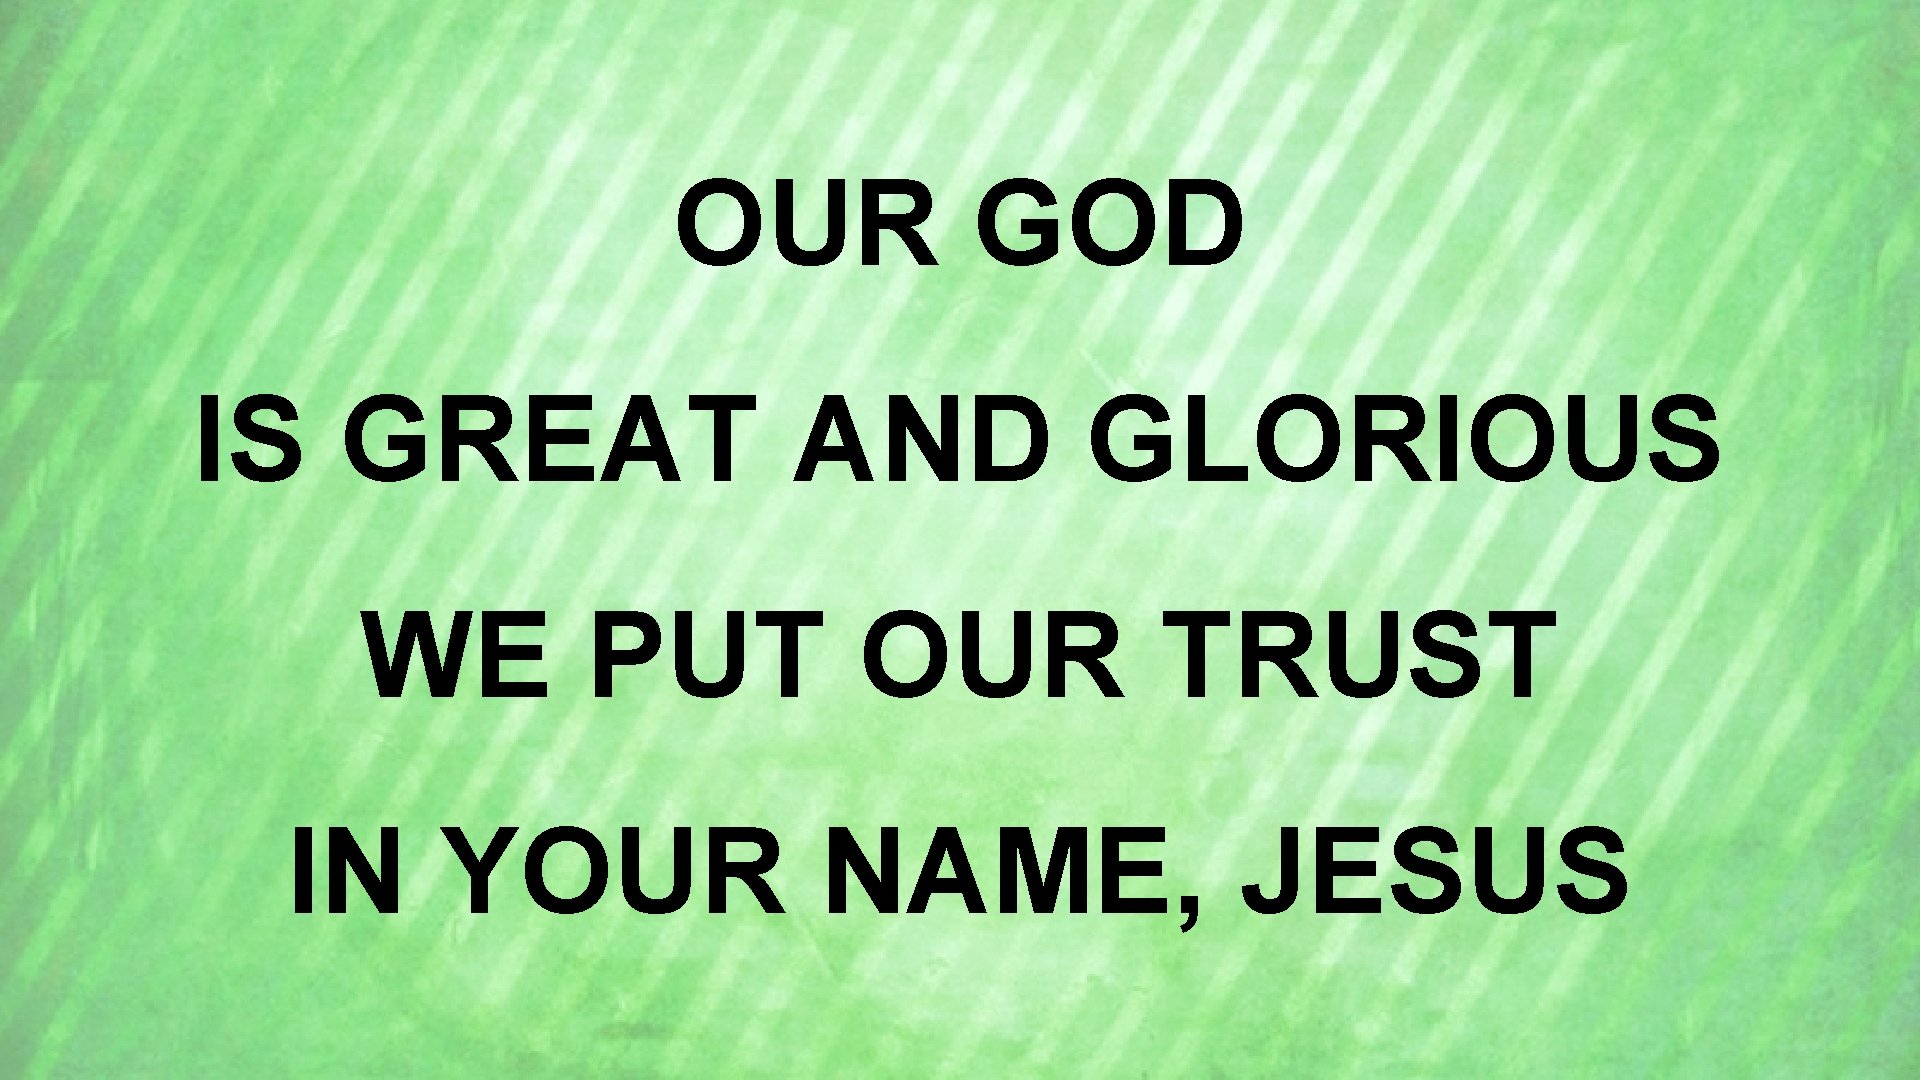 OUR GOD IS GREAT AND GLORIOUS WE PUT OUR TRUST IN YOUR NAME, JESUS